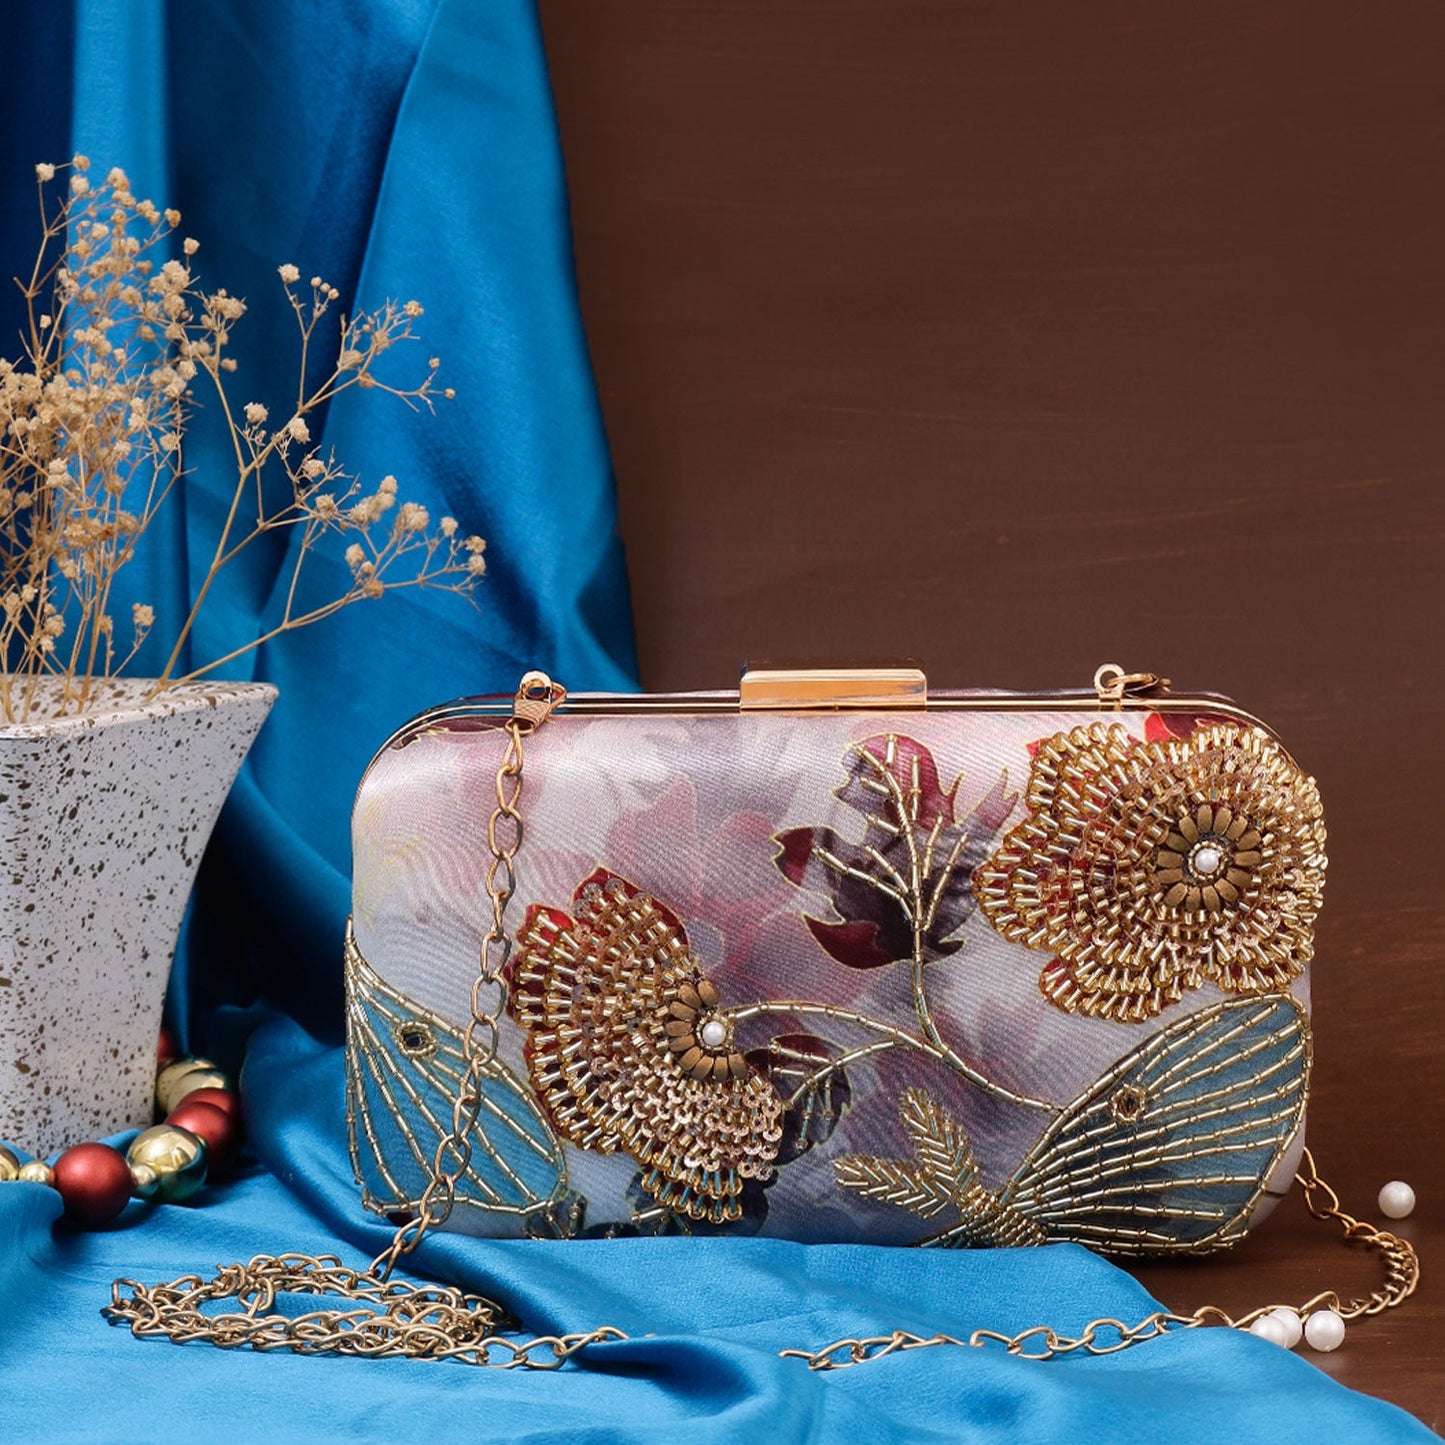 Swisni printed embroidered floral clutch bag